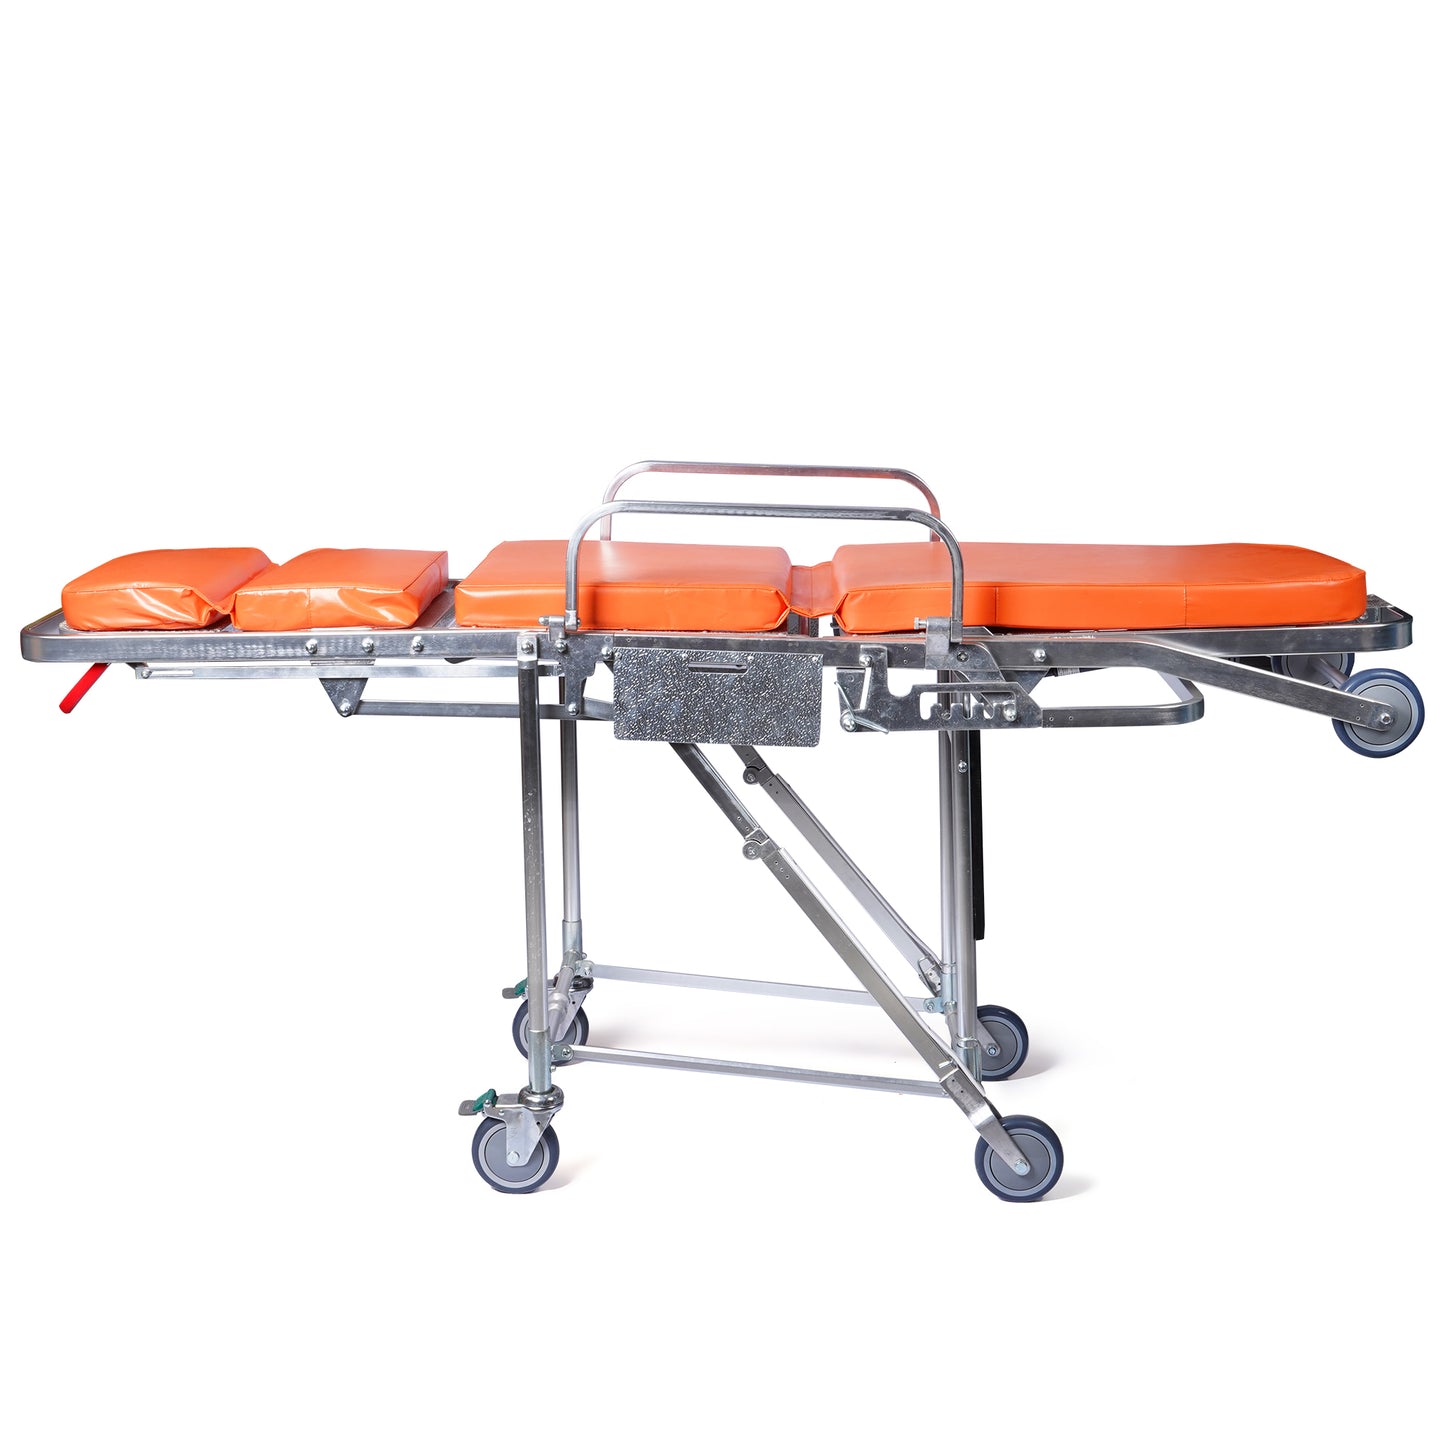 ARREX STR 20 PRO AMBULANCE STRETCHER: FOLDS INTO CHAIR POSITION, HEAVY-DUTY CASTORS WITH PEDAL BRAKES, COLLAPSIBLE LEGS, SAFETY AND VERSATILITY